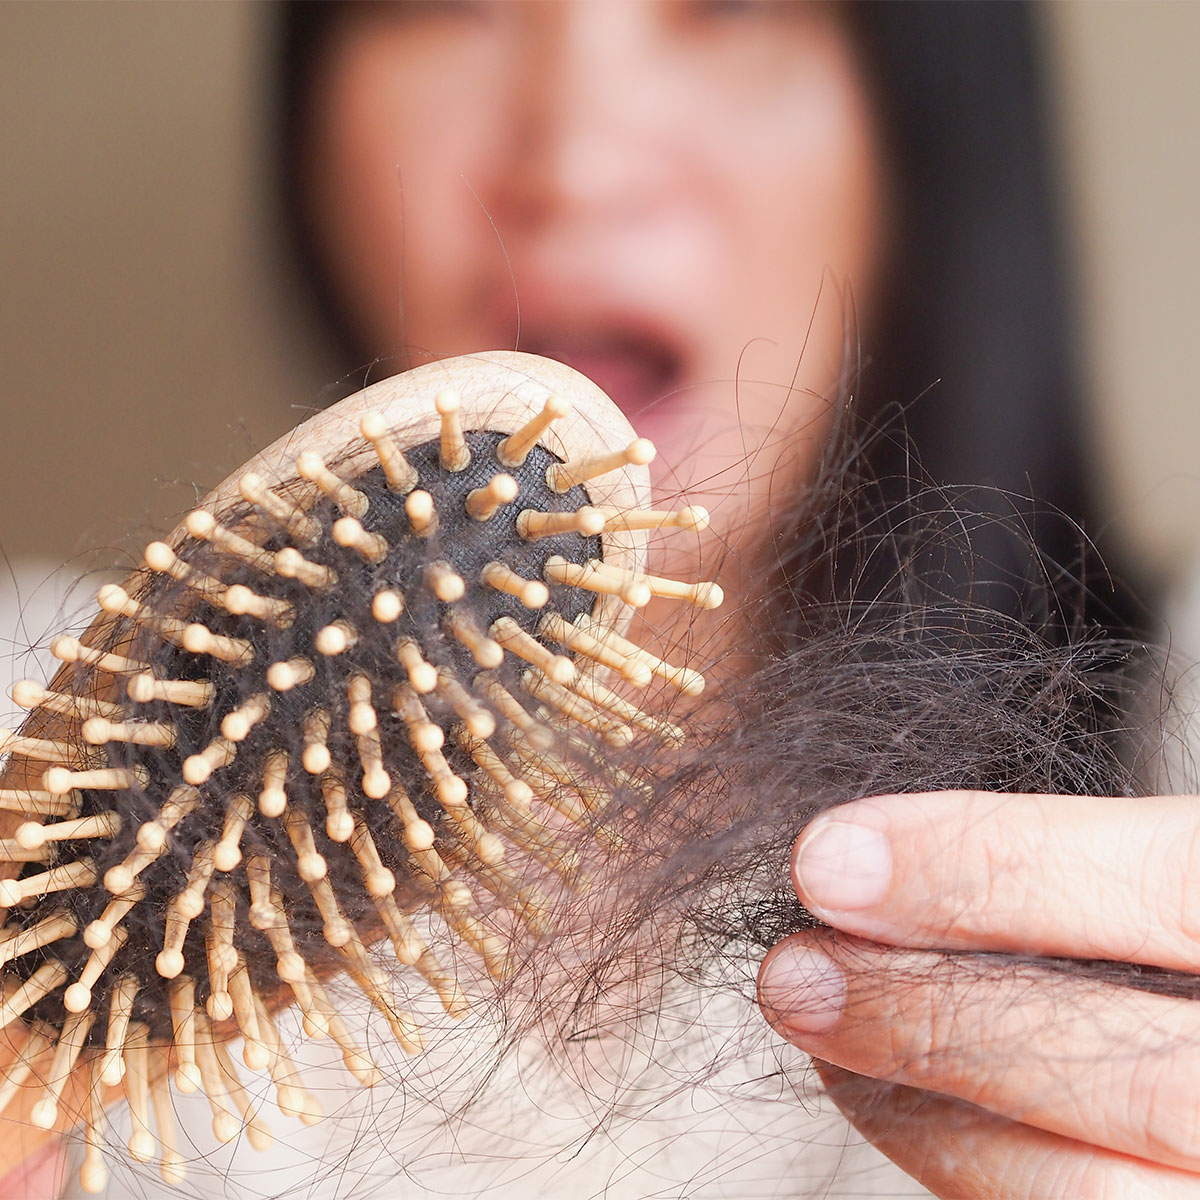 hair loss woman shocked holding up hair brush clumps